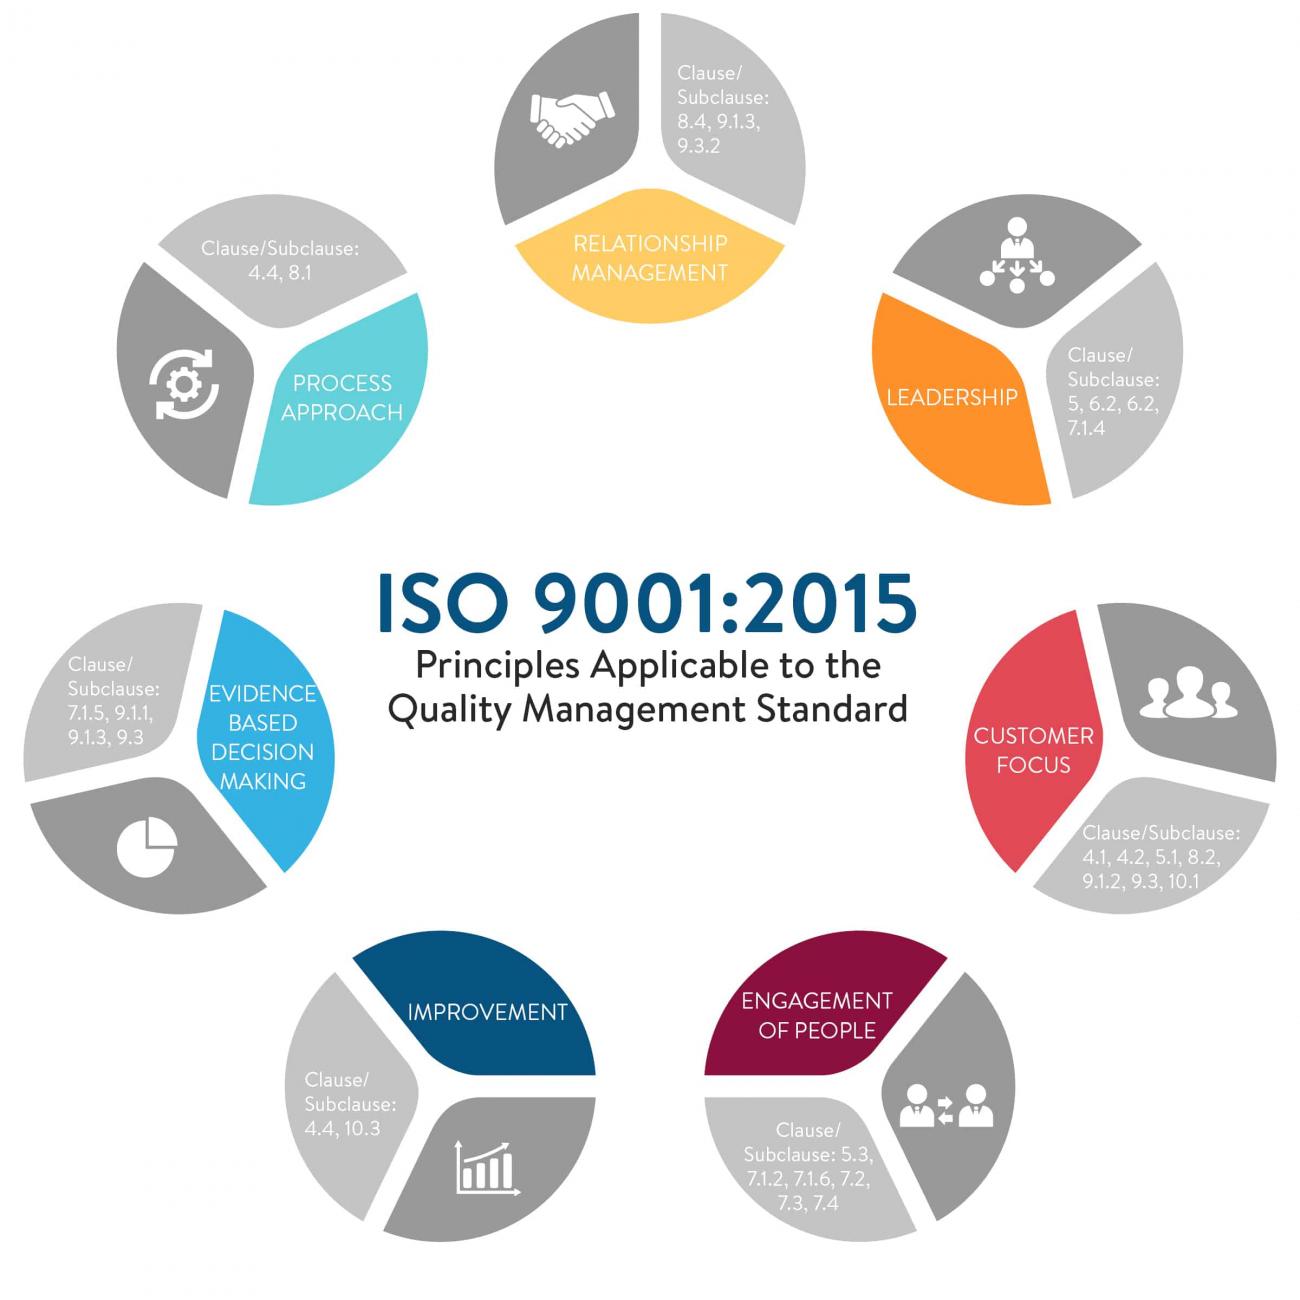 The Ultimate Guide to ISO 9000 | Smartsheet